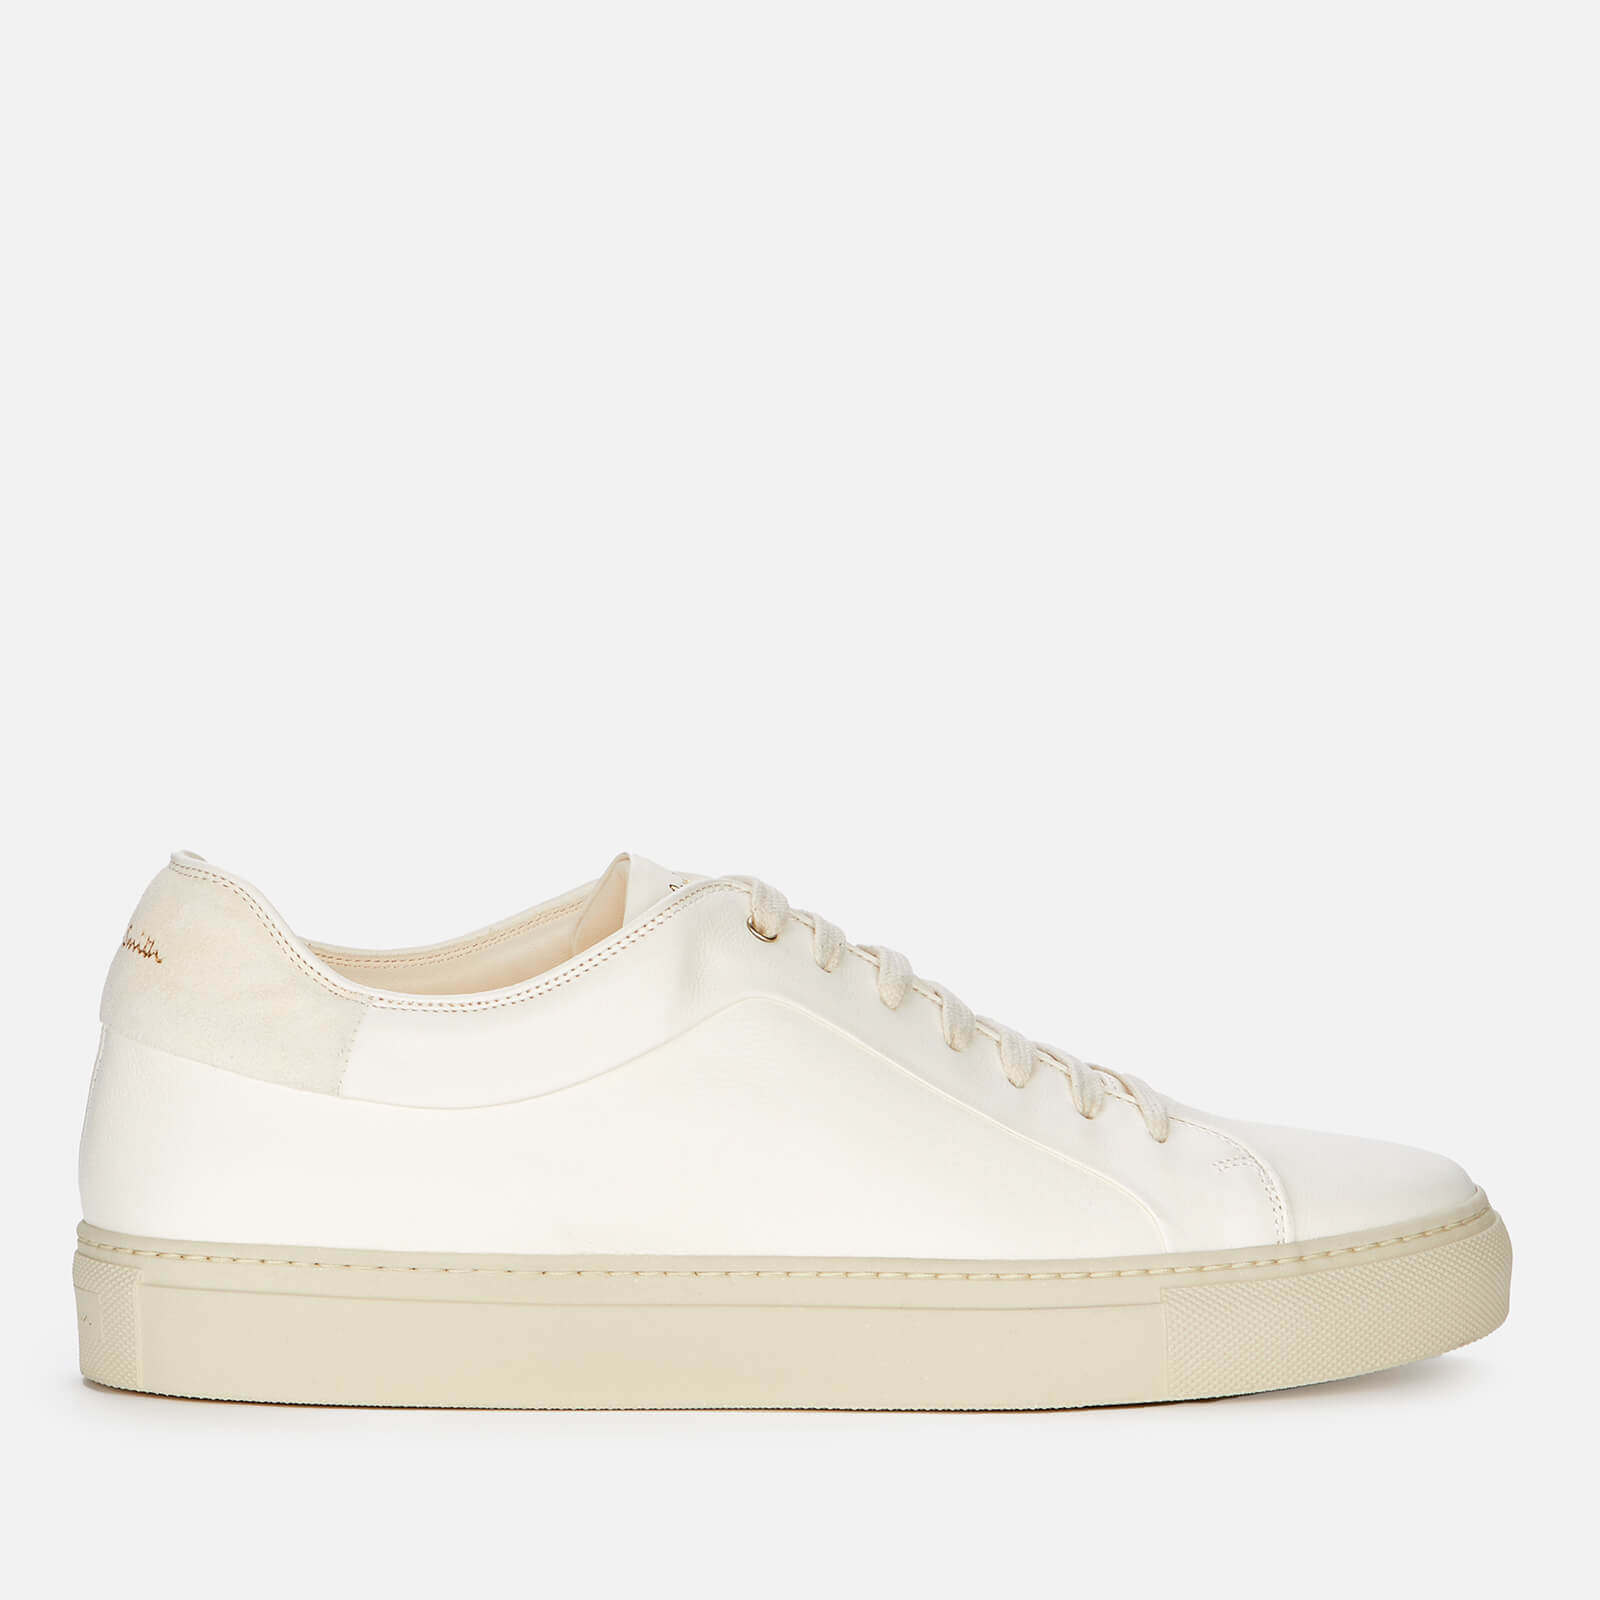 Paul Smith Men's Basso Leather Cupsole Trainers - Off White - UK 8